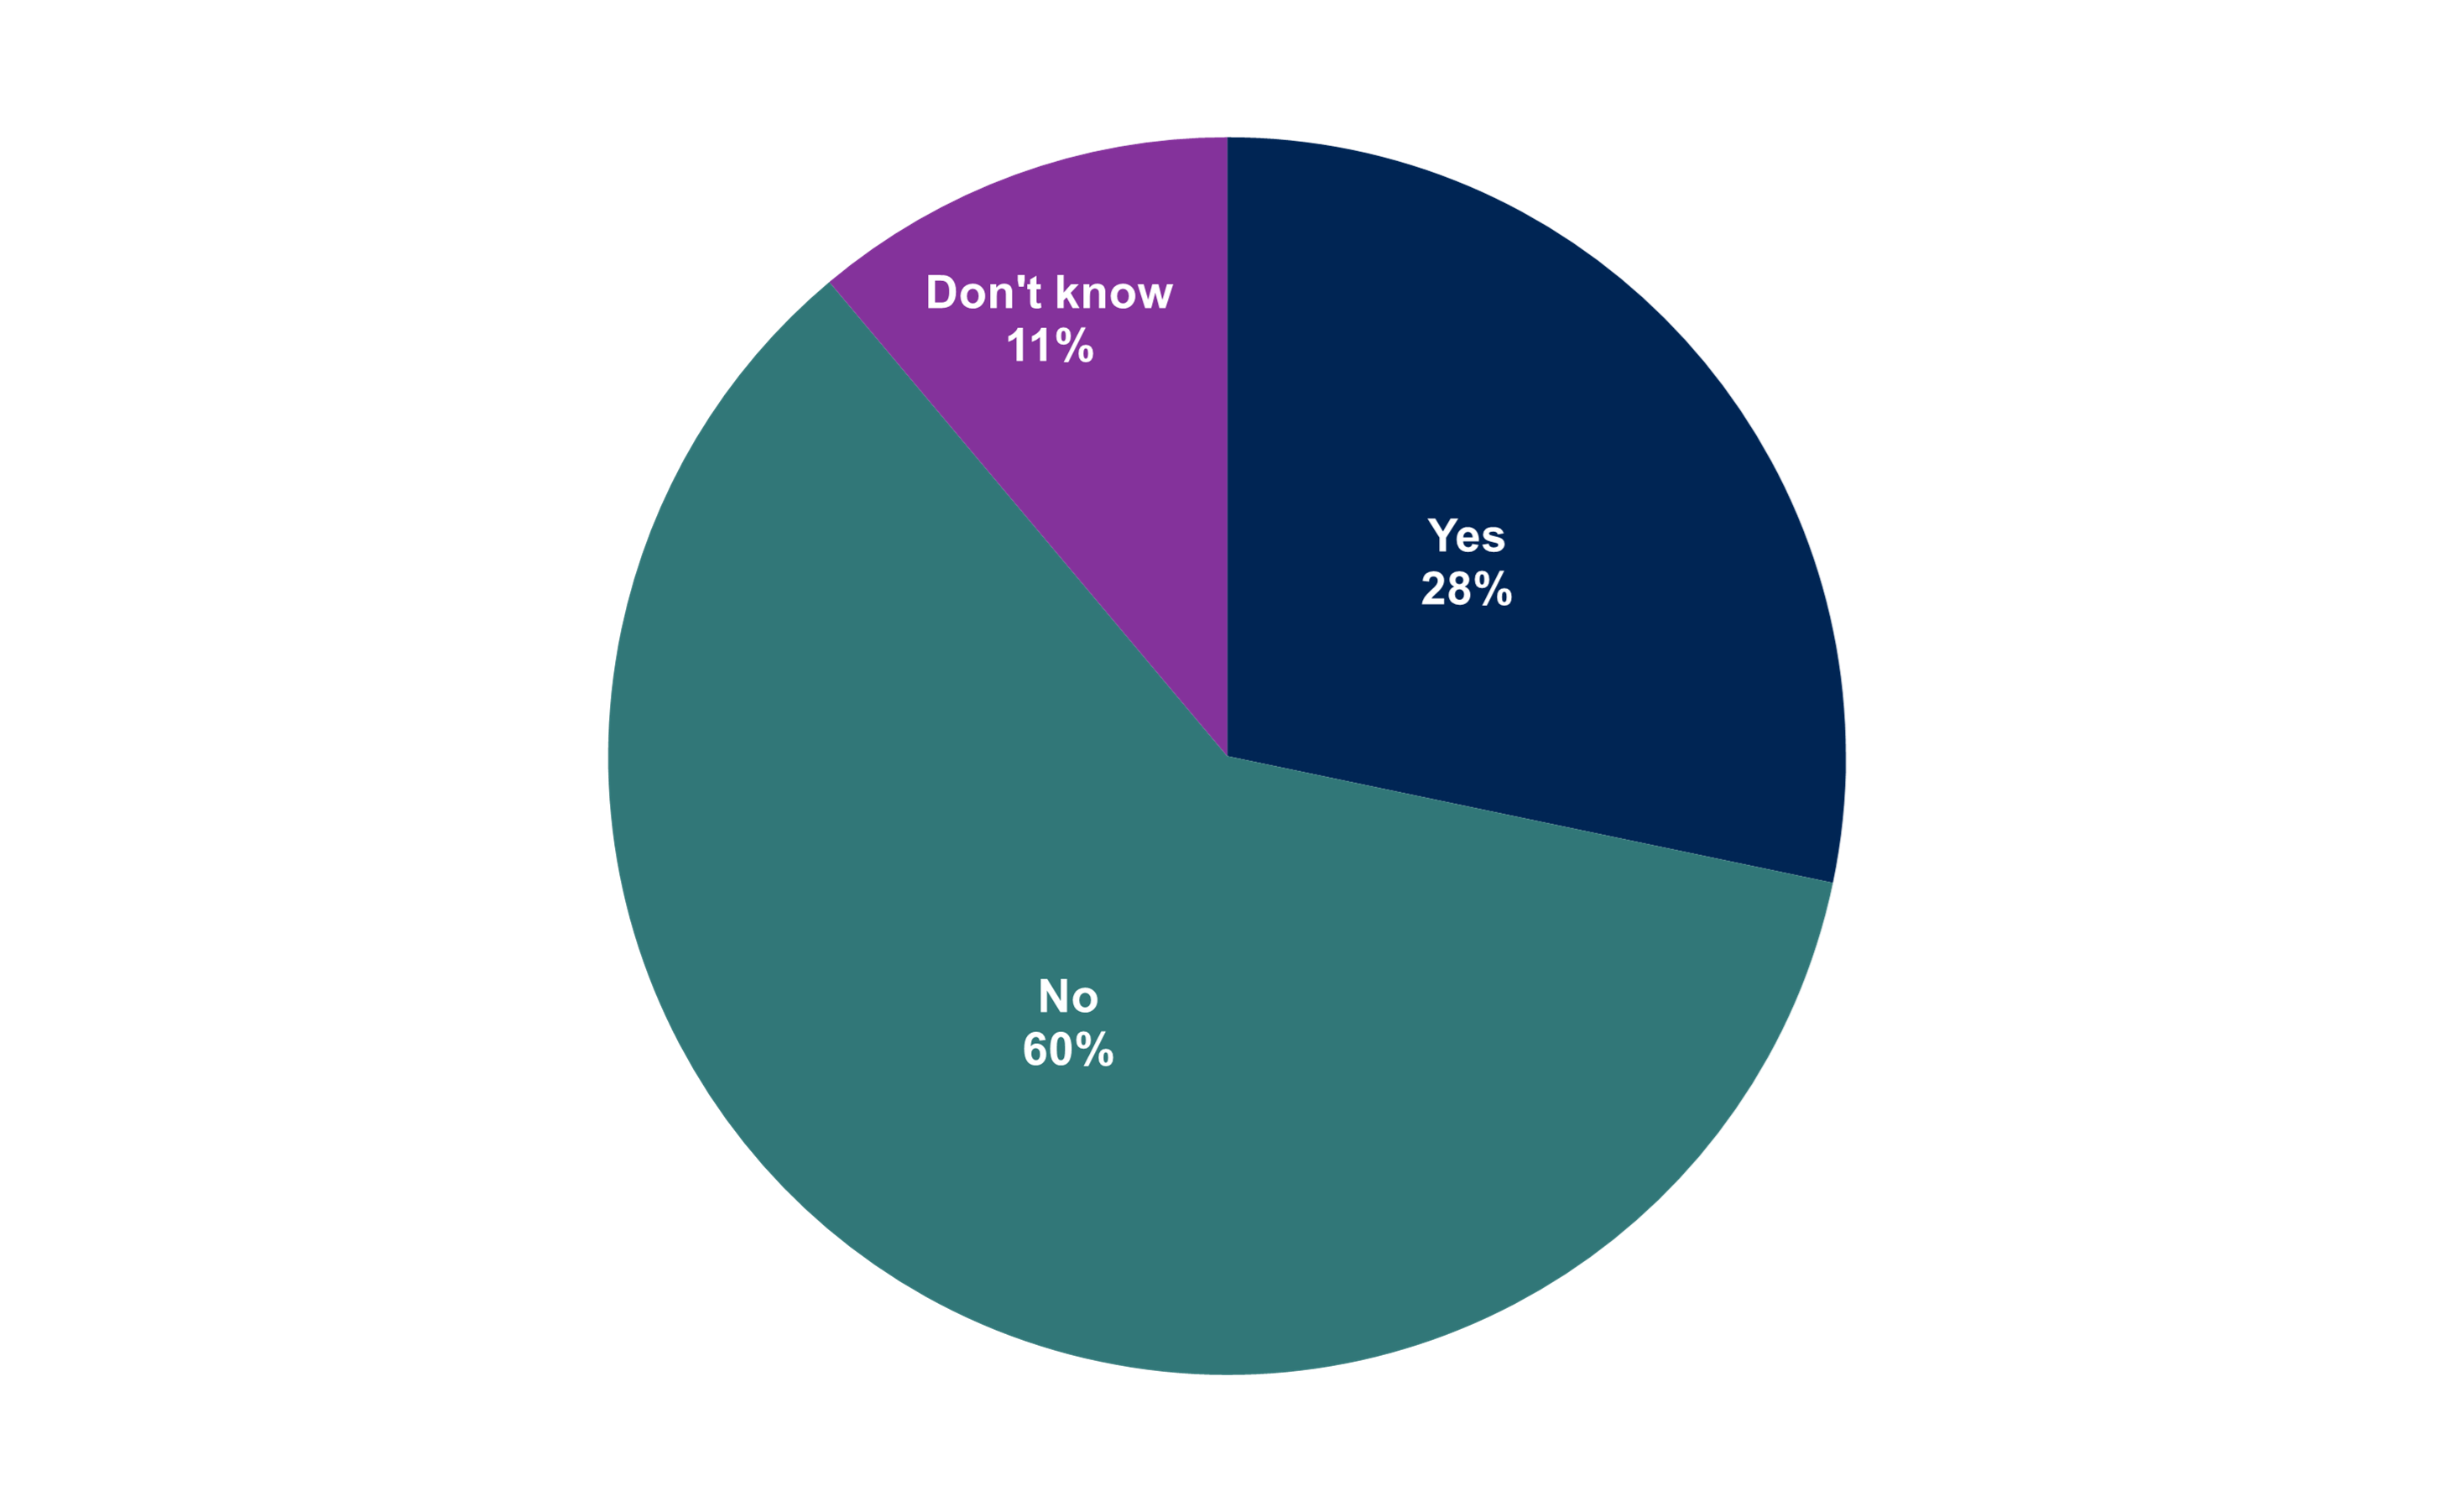 A pie chart showing the experience of ever seeing family members gambling. Data from the chart is provided within the following table.